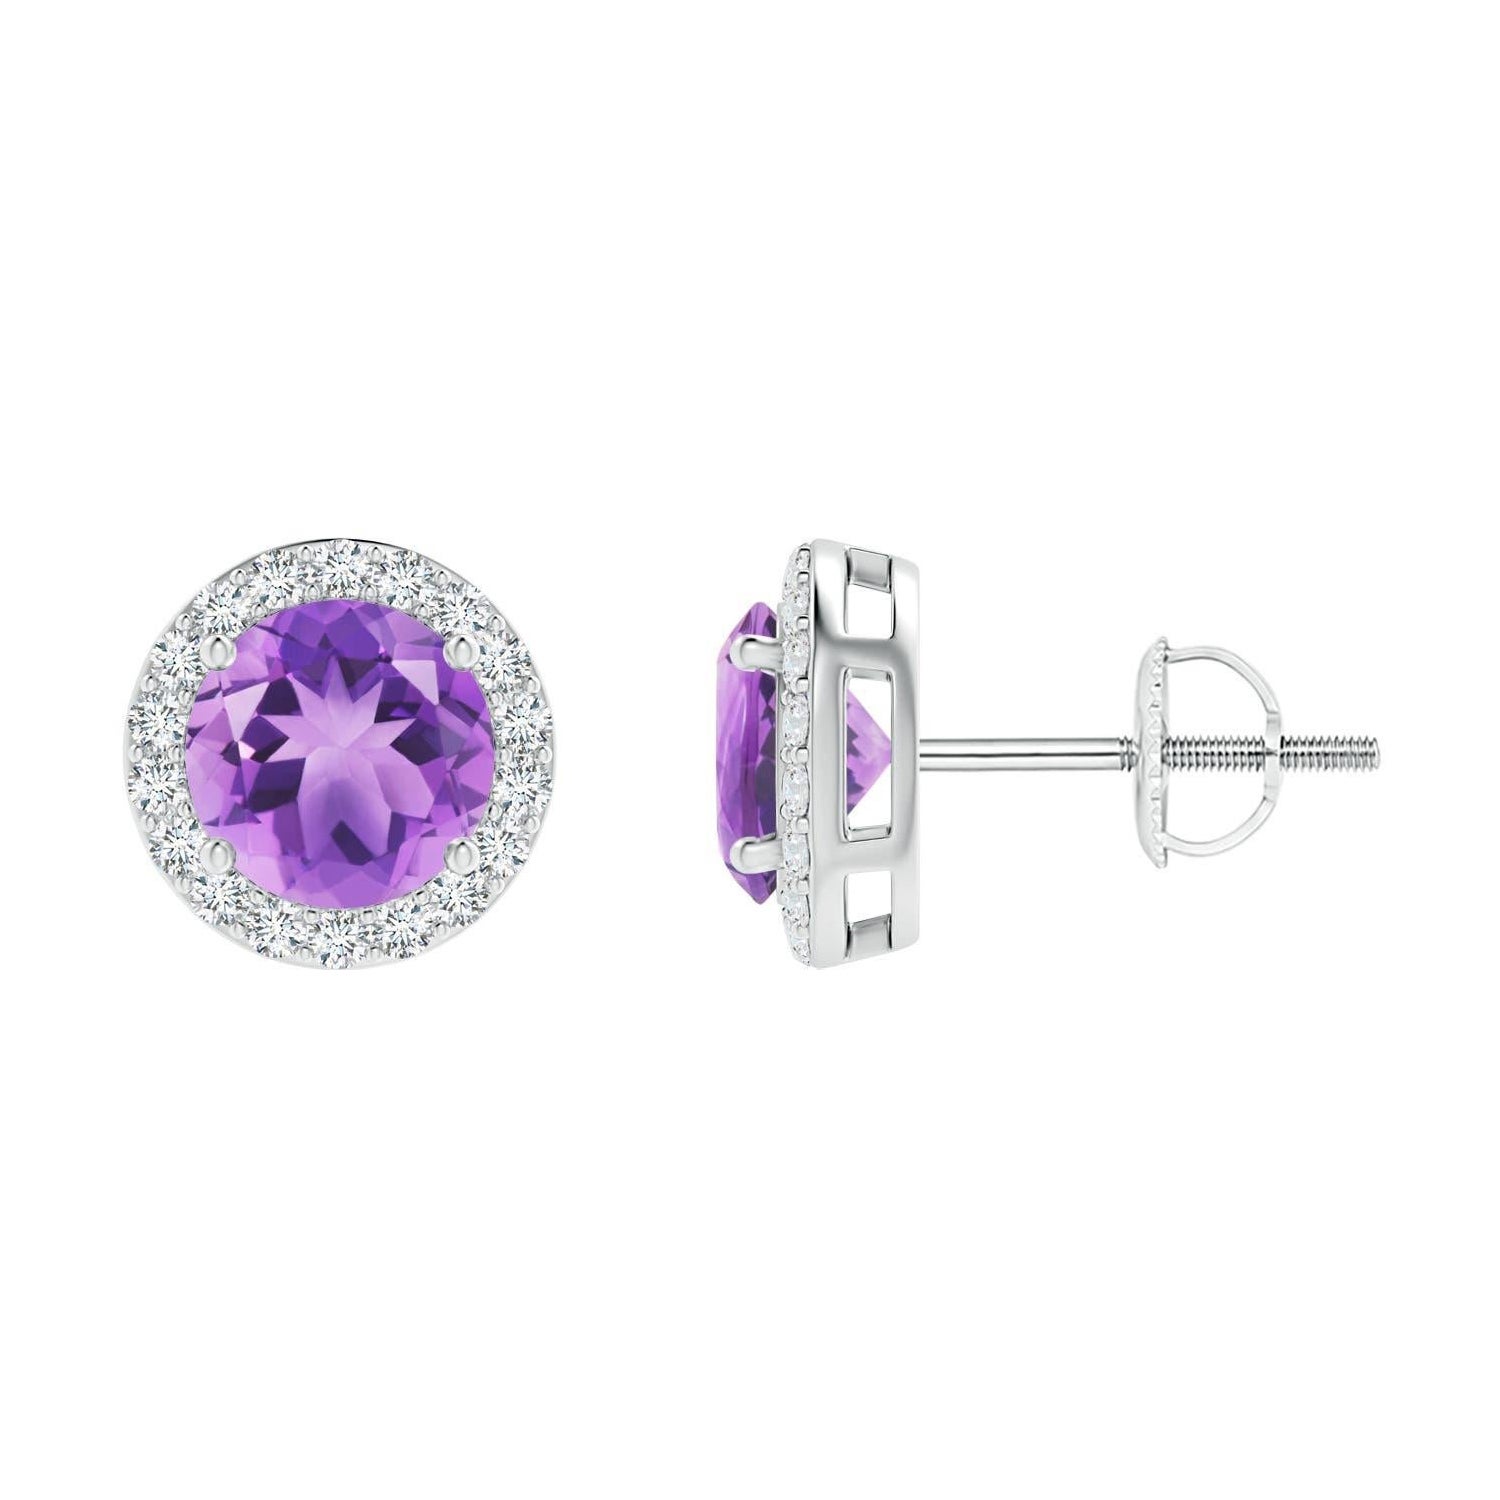 Natural Vintage Round 1.6ct Amethyst Halo Stud Earrings in 14K White Gold